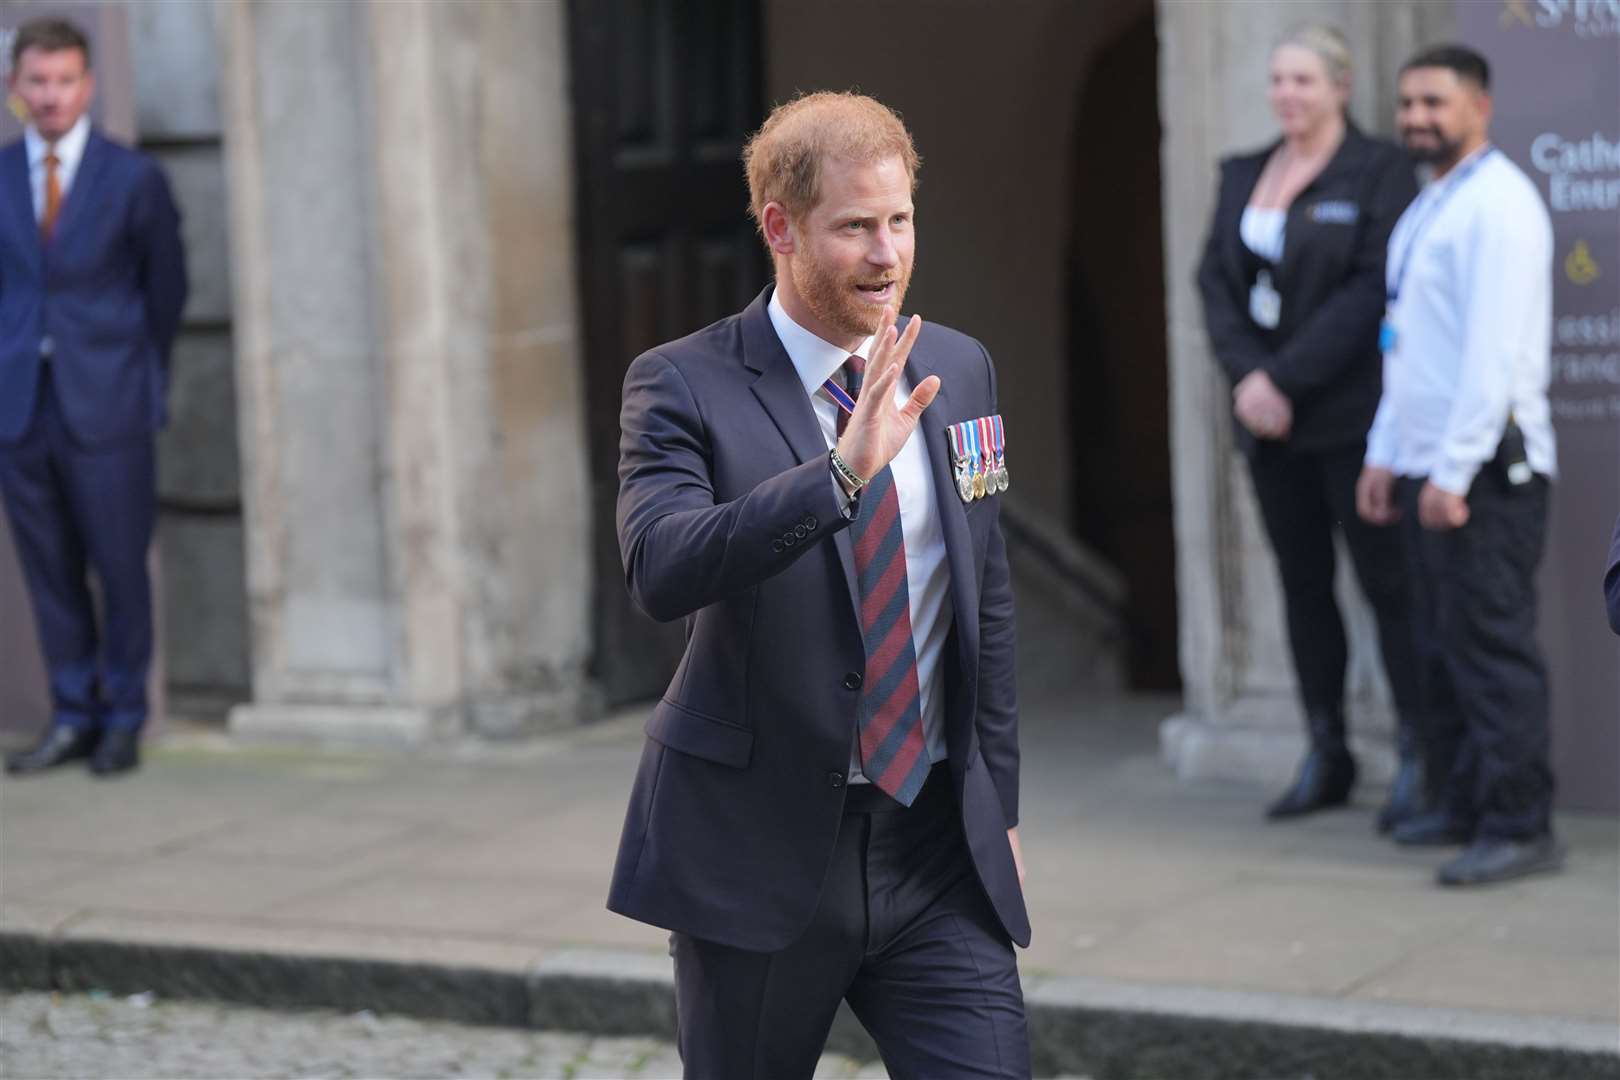 The Duke of Sussex leaves St Paul’s Cathedral in London after attending a service of thanksgiving to mark the 10th anniversary of the Invictus Games (Yui Mok/PA)